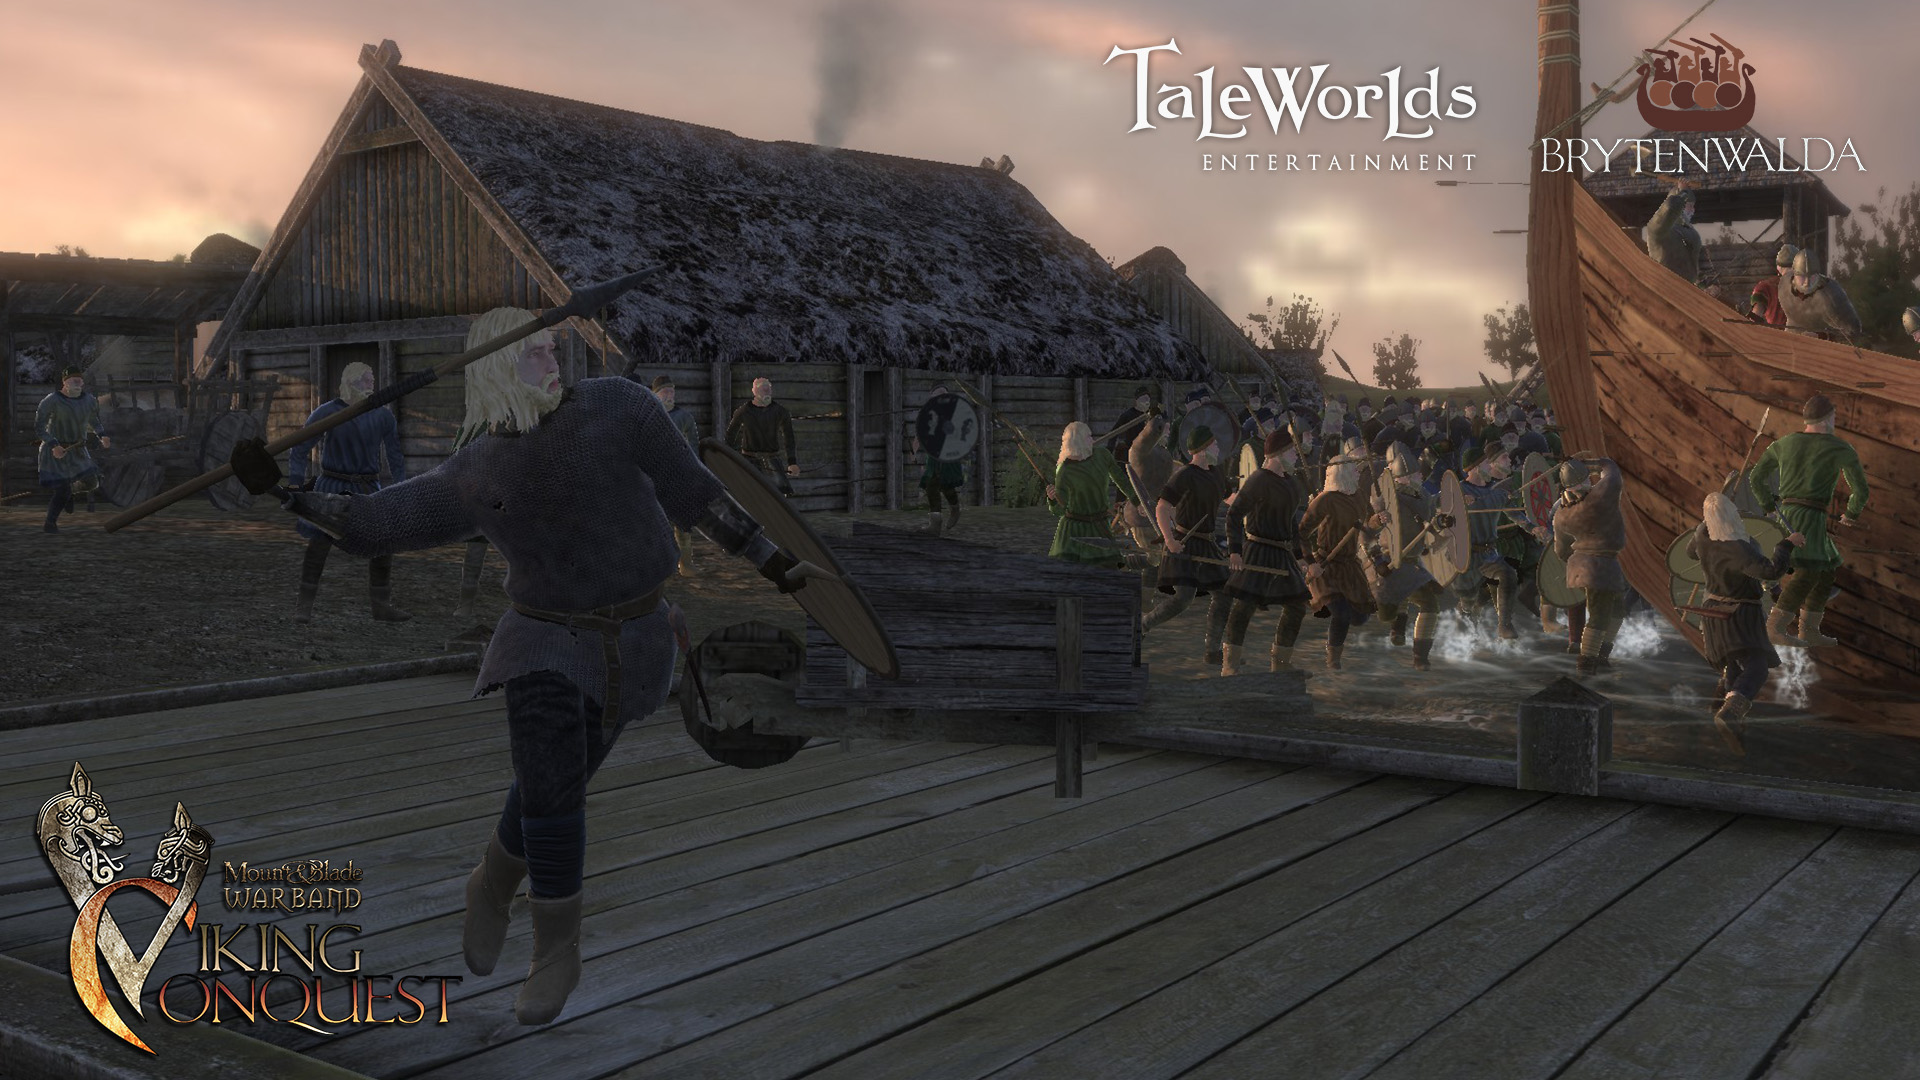 mount and blade warband serial key free